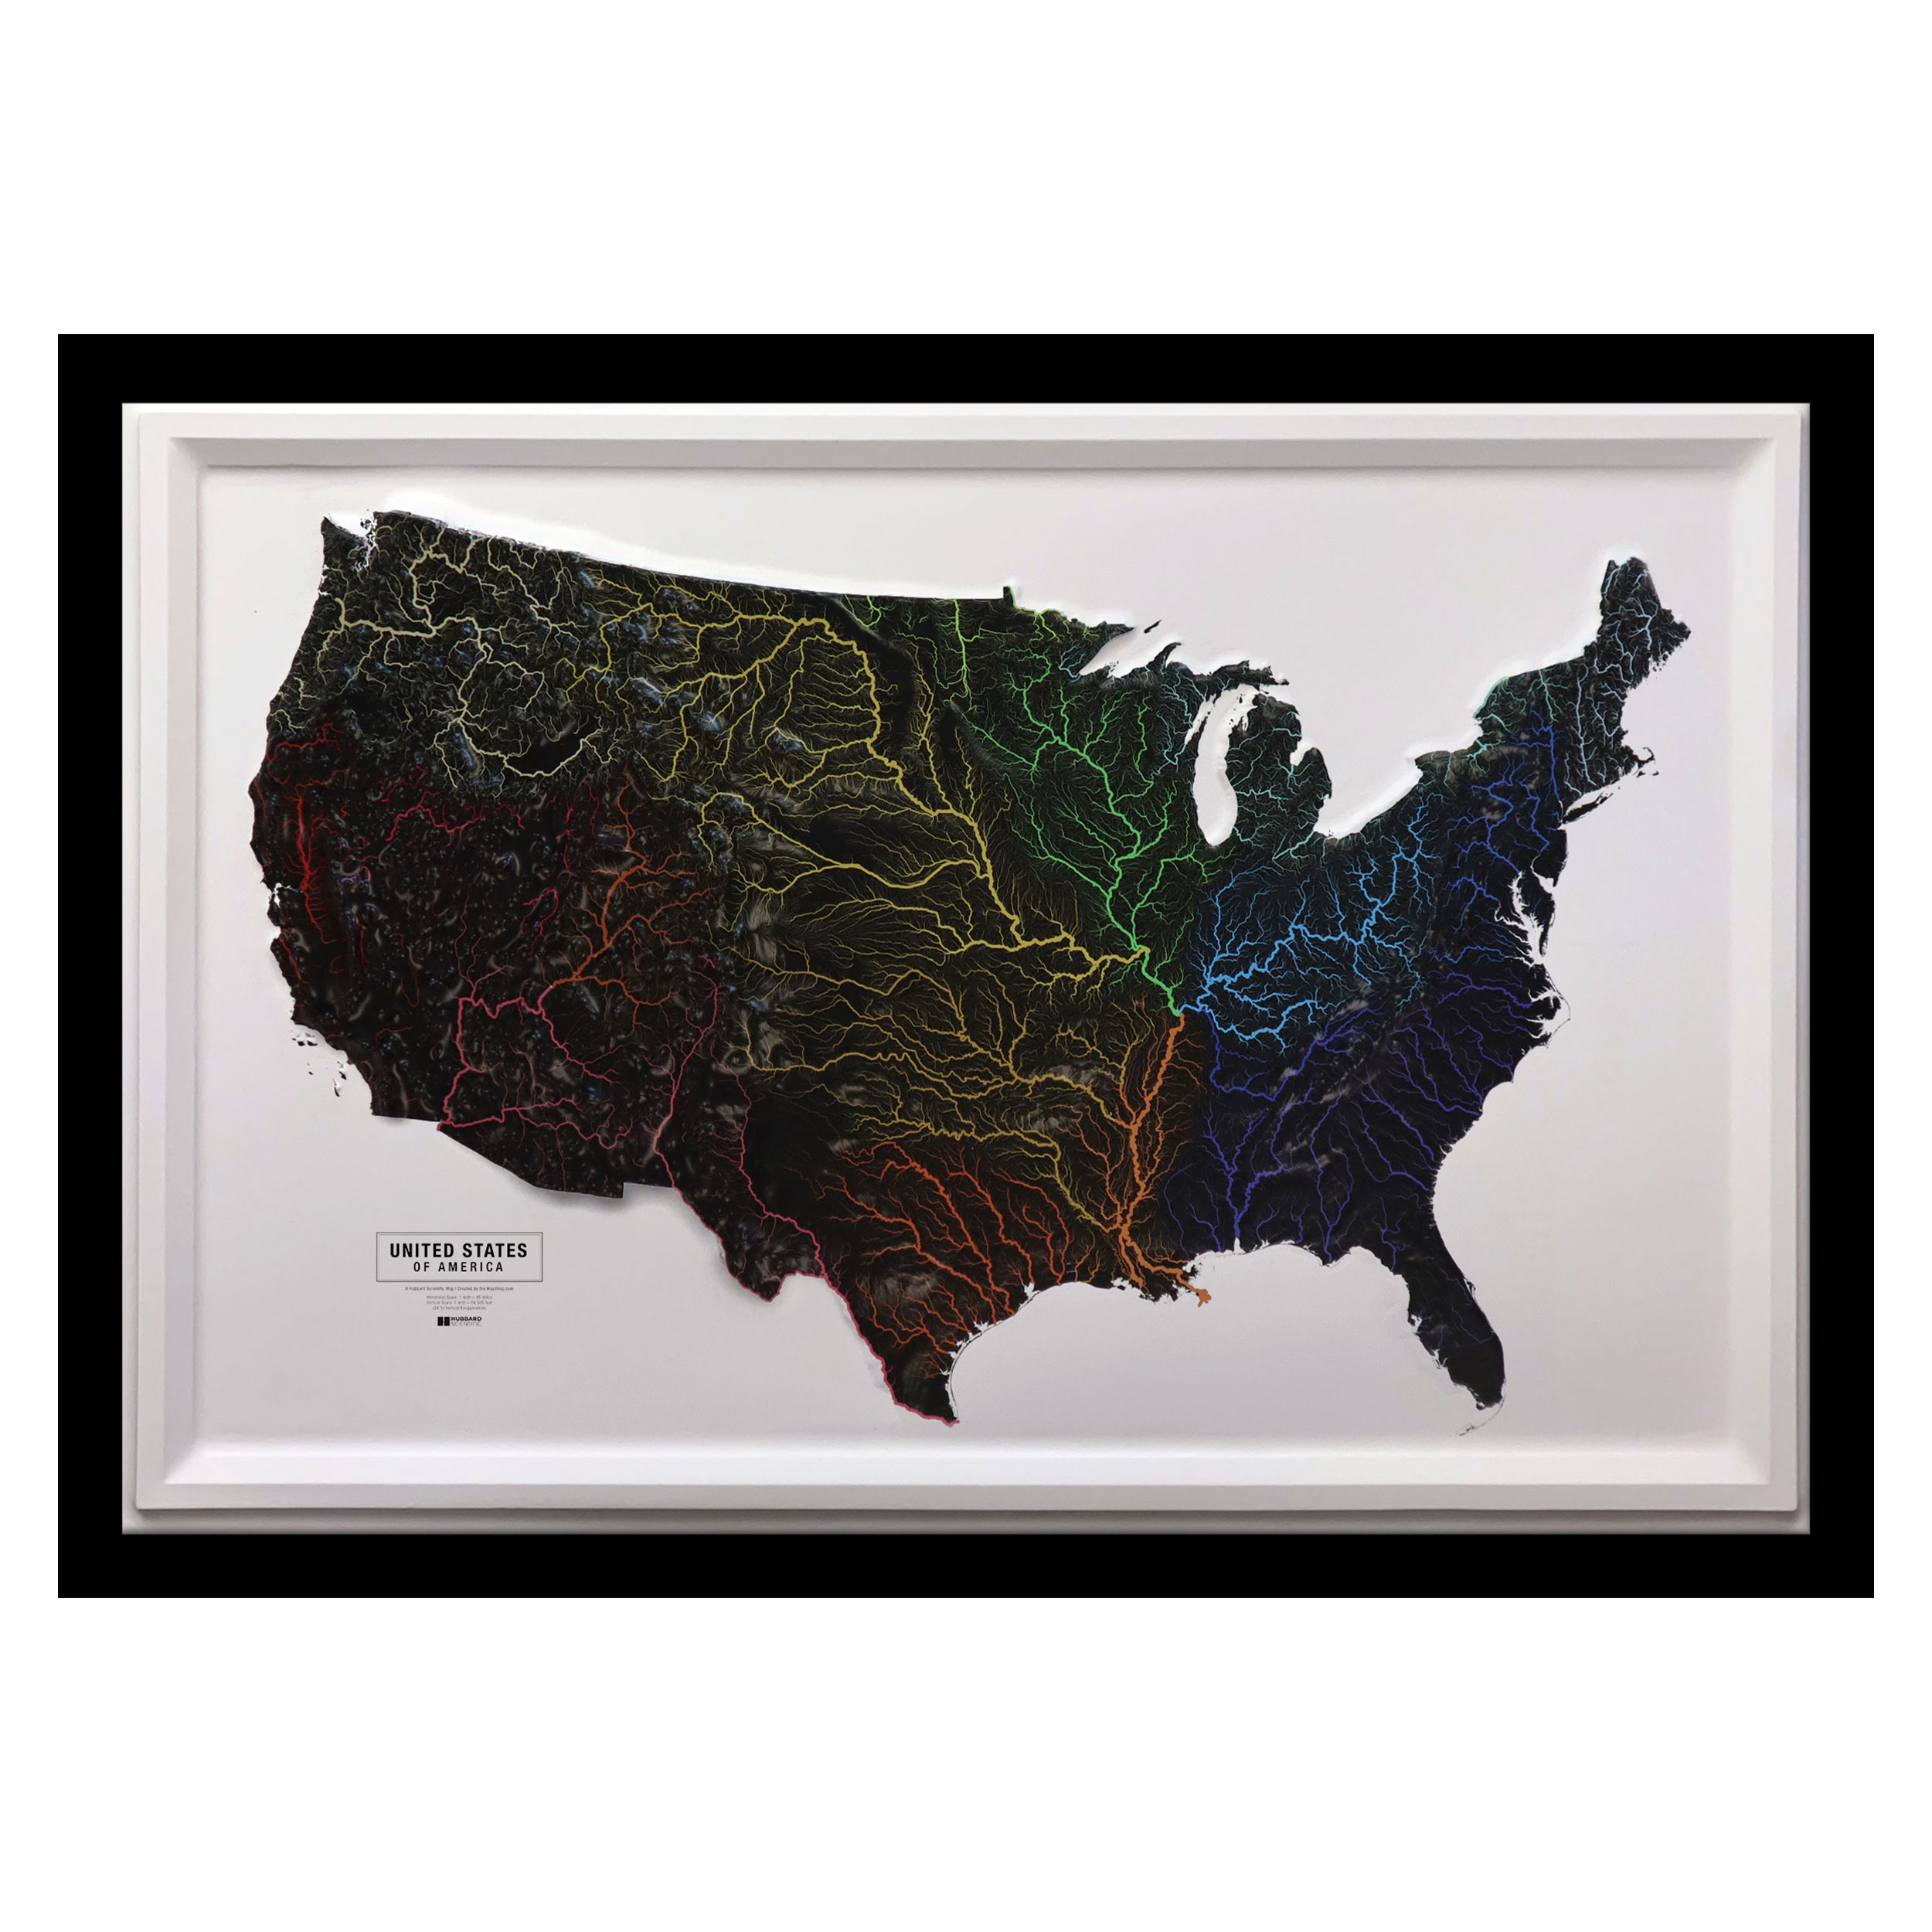 Relief　Shop　The　Map　by　Raised　Scientific　Hubbard　United　Hydrological　States　Map